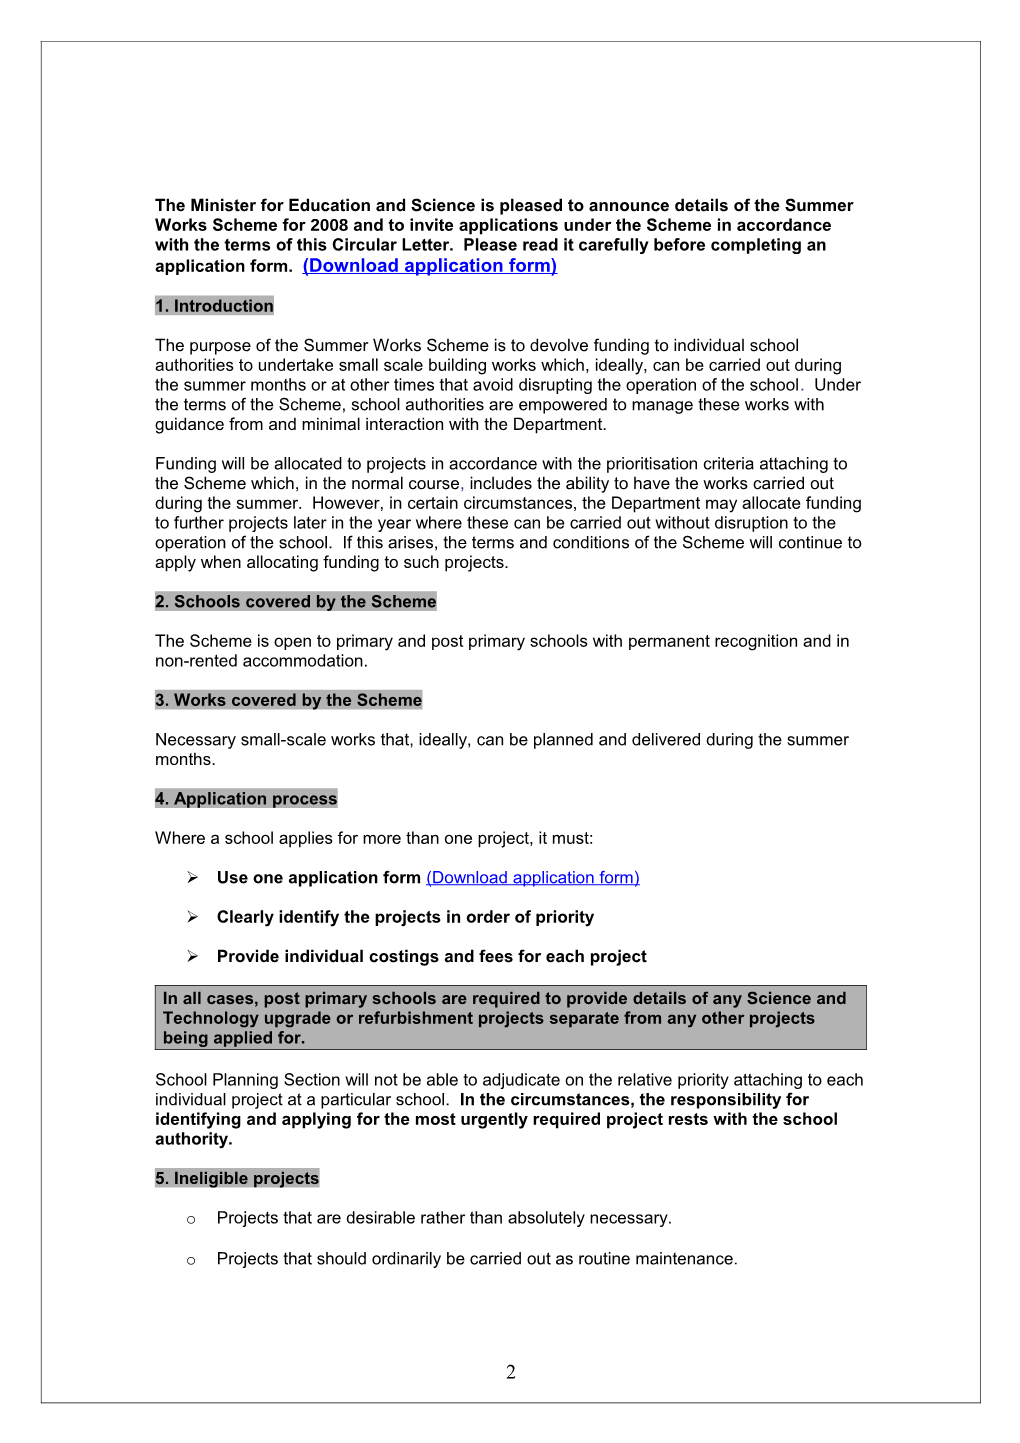 Circular 0043/2007 - Summer Works Scheme 2008 - Scheme of Capital Grants for Small Scale